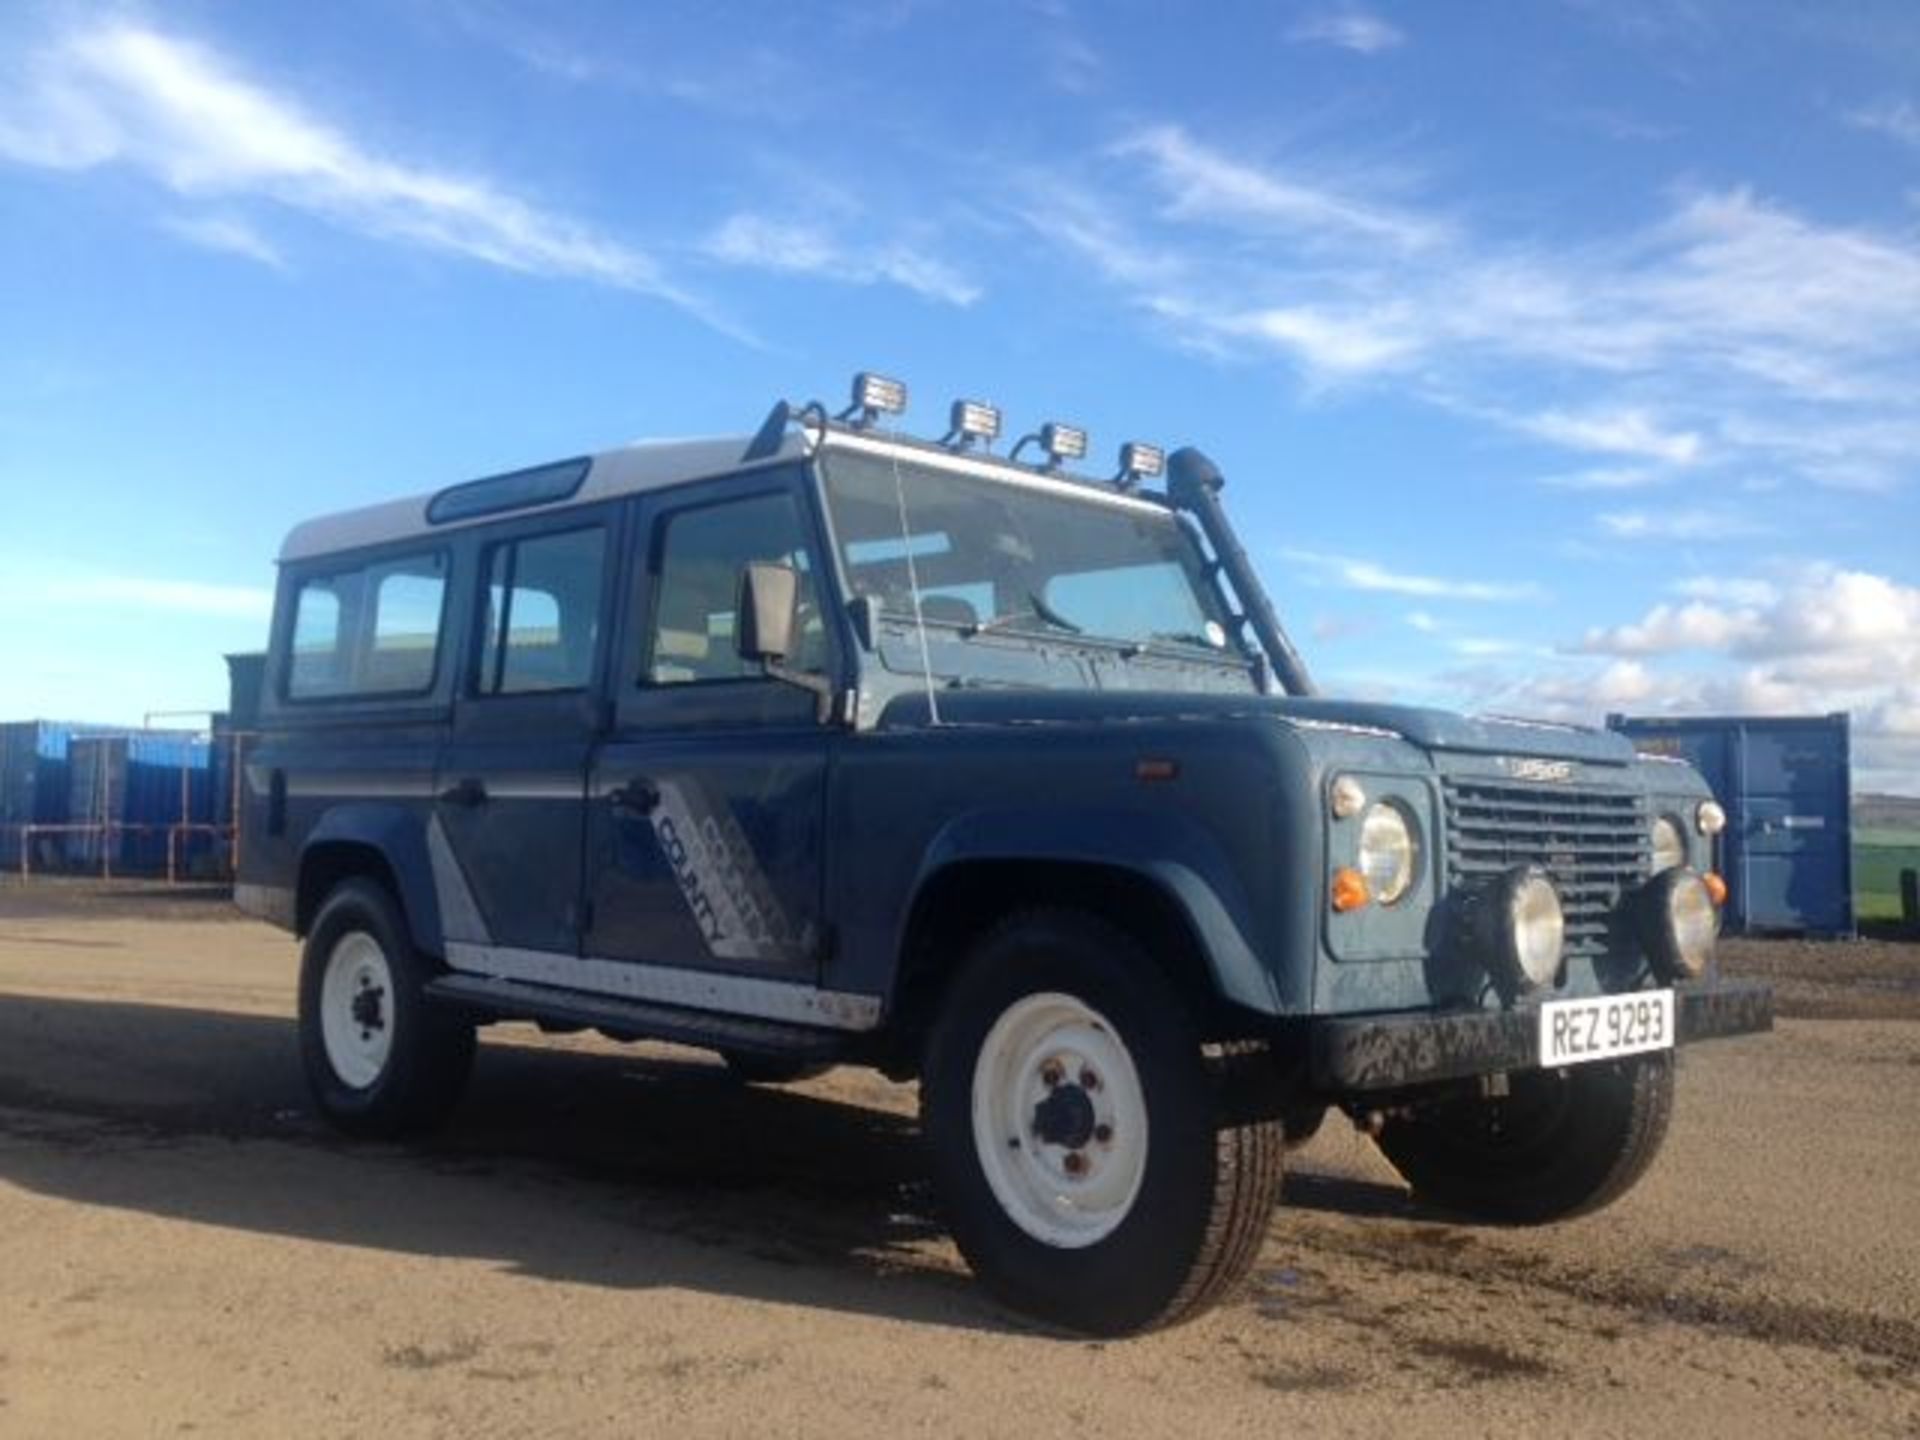 LAND ROVER 110 4C COUNTY D TURBO - 2495cc - Image 2 of 4